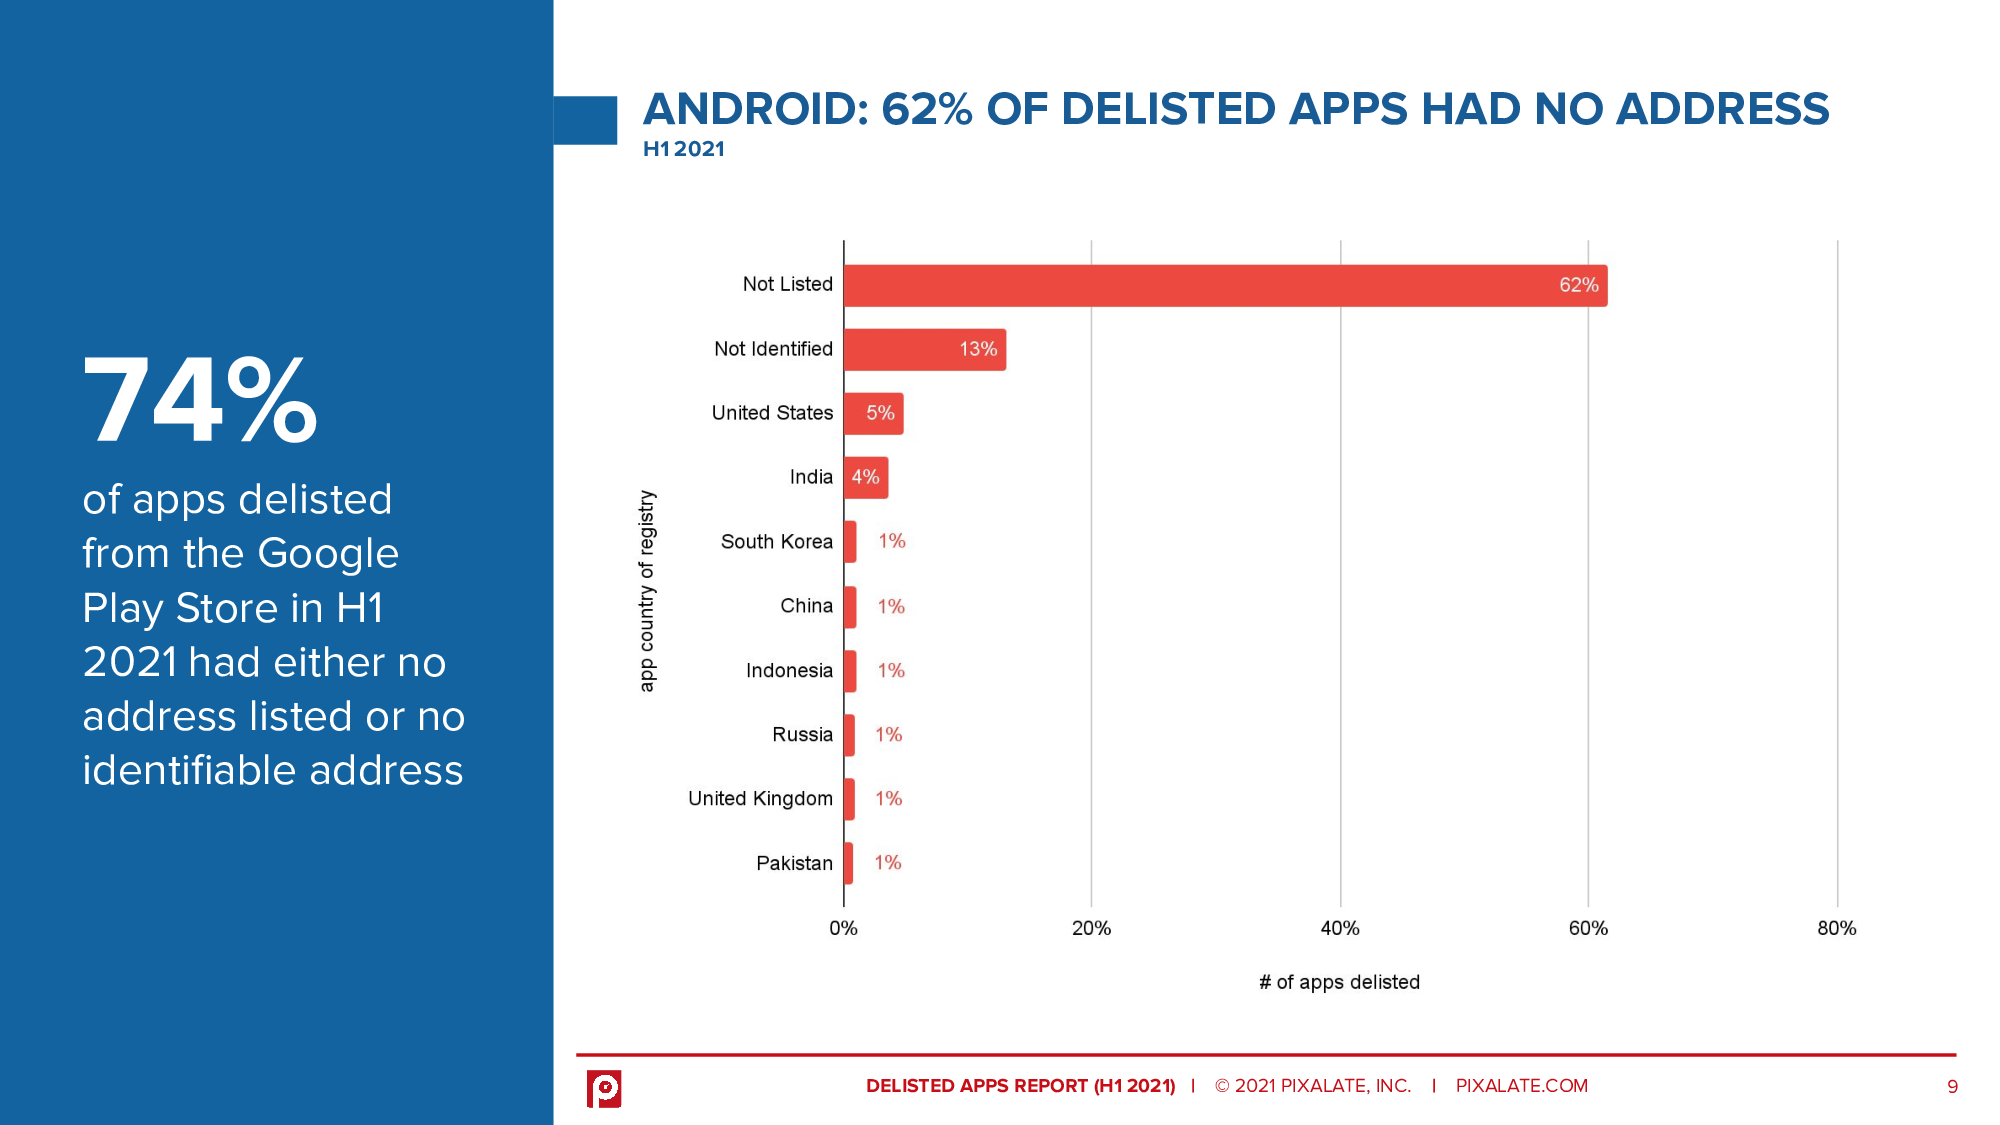 74% of apps delisted from the Google Play Store in H1 2021 had either no address listed or no identifiable address